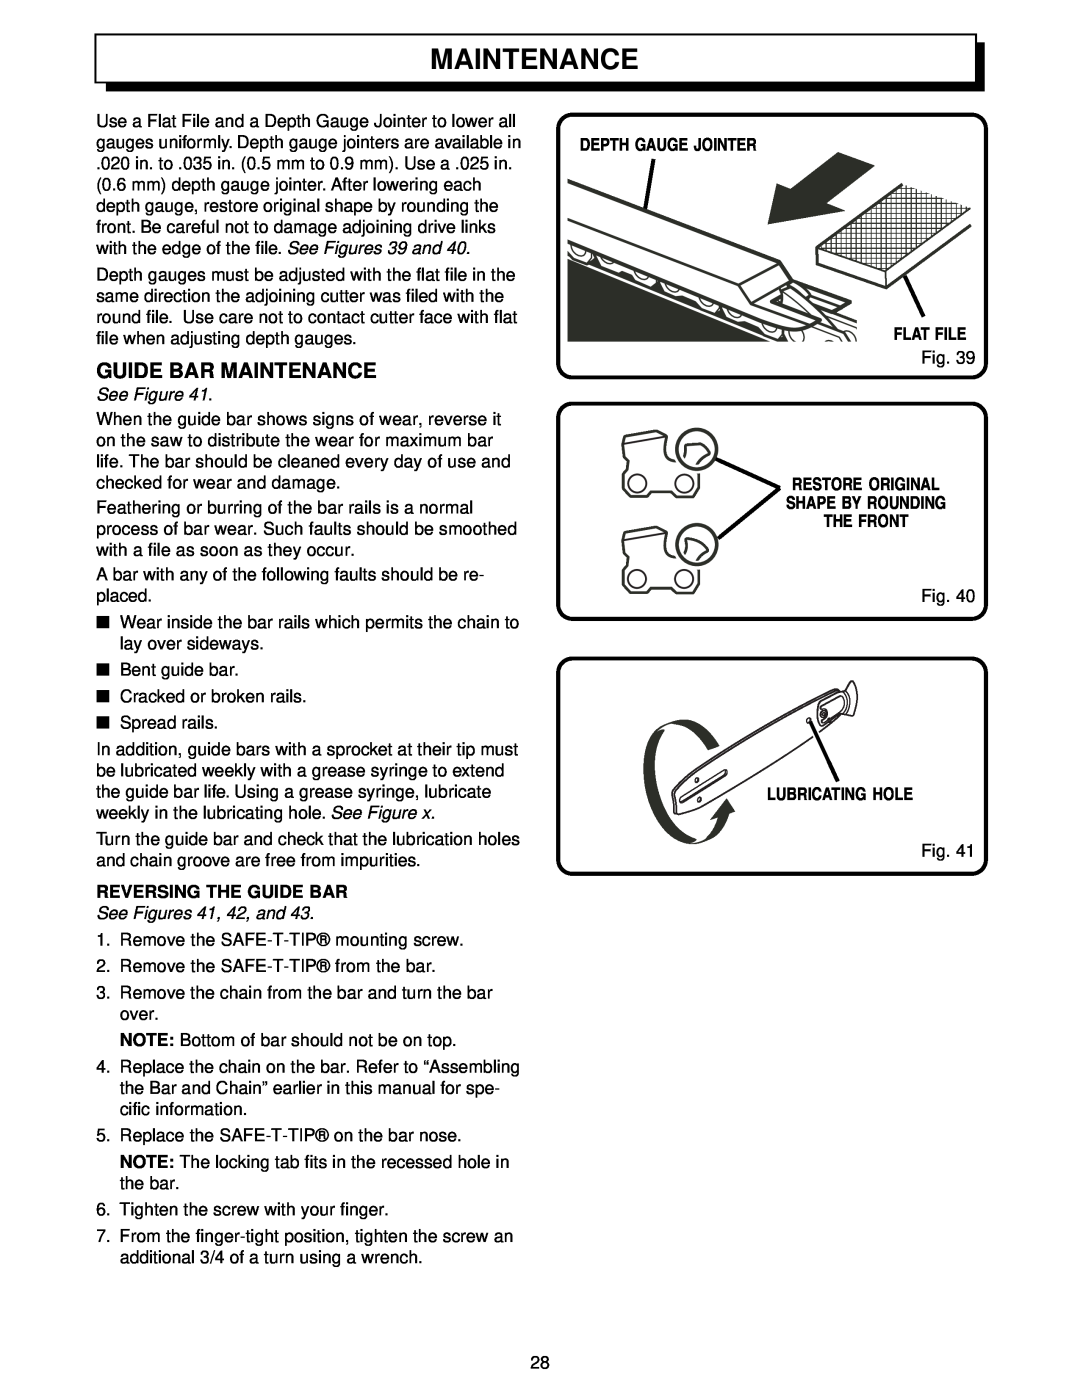 Homelite UT34010 Guide Bar Maintenance, Reversing The Guide Bar, See Figures 41, 42, and, Flat File, Lubricating Hole 